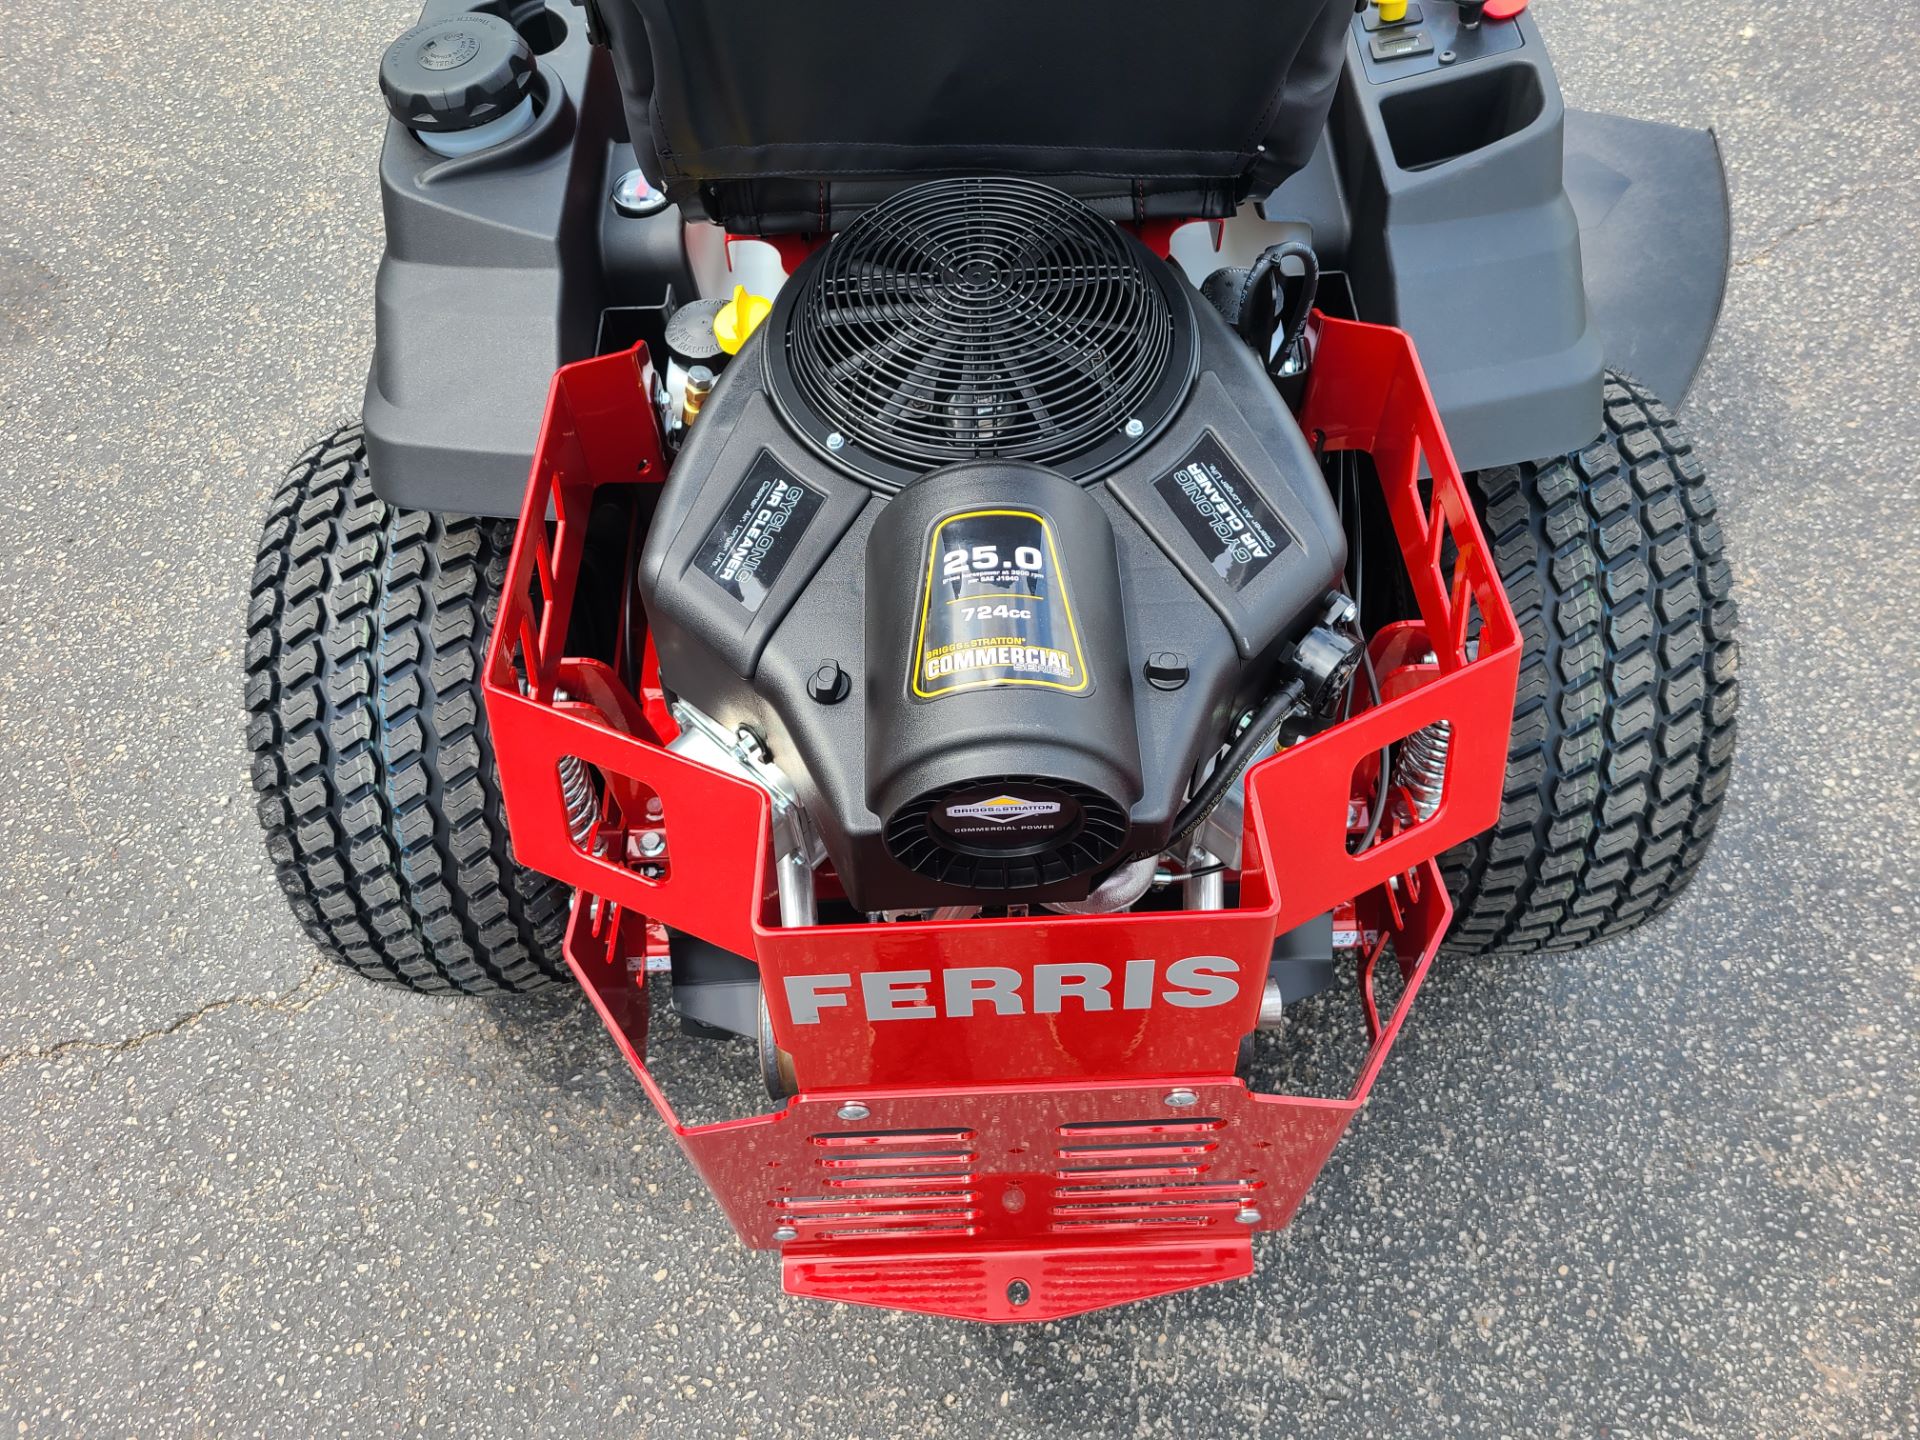 2022 Ferris Industries 500S 48 in. Briggs & Stratton Commercial 25 hp in Fond Du Lac, Wisconsin - Photo 4